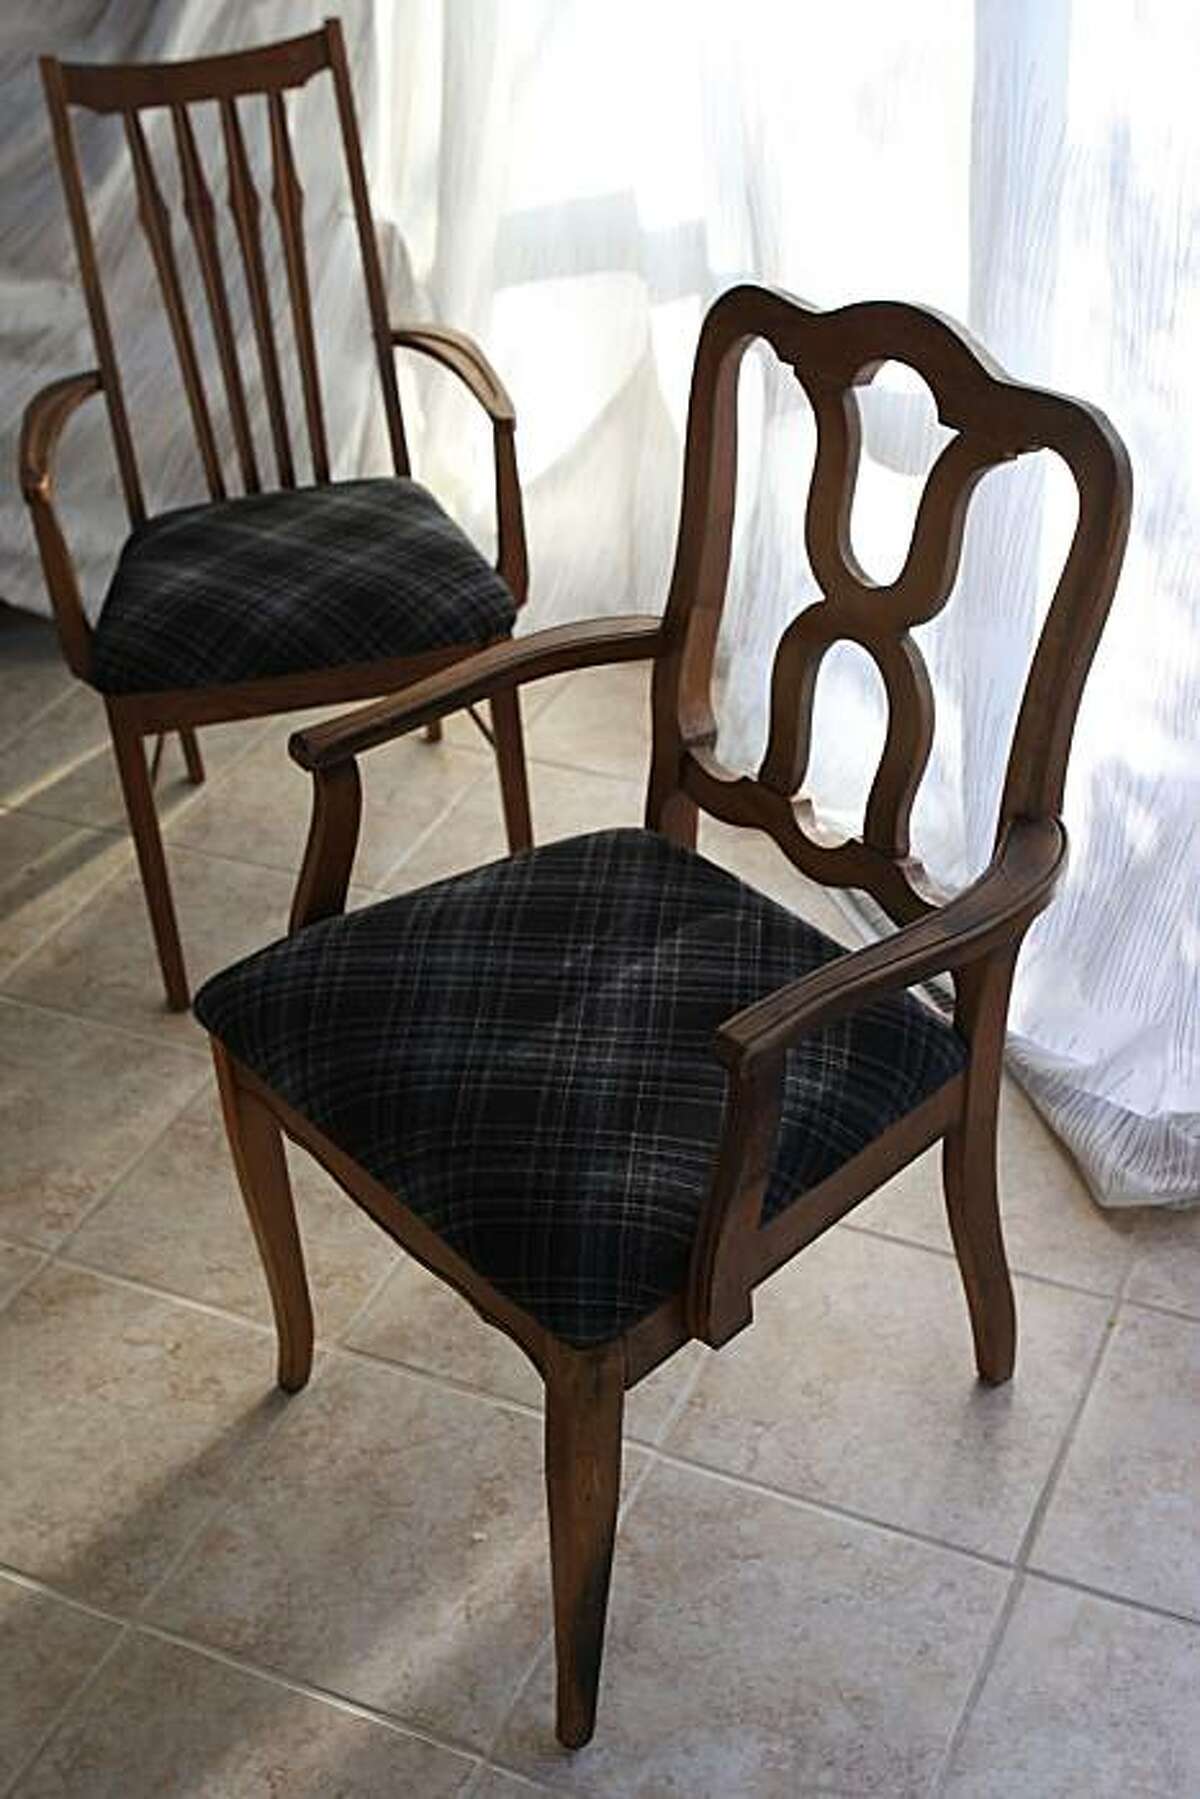 Reupholstered mismatched dining chairs